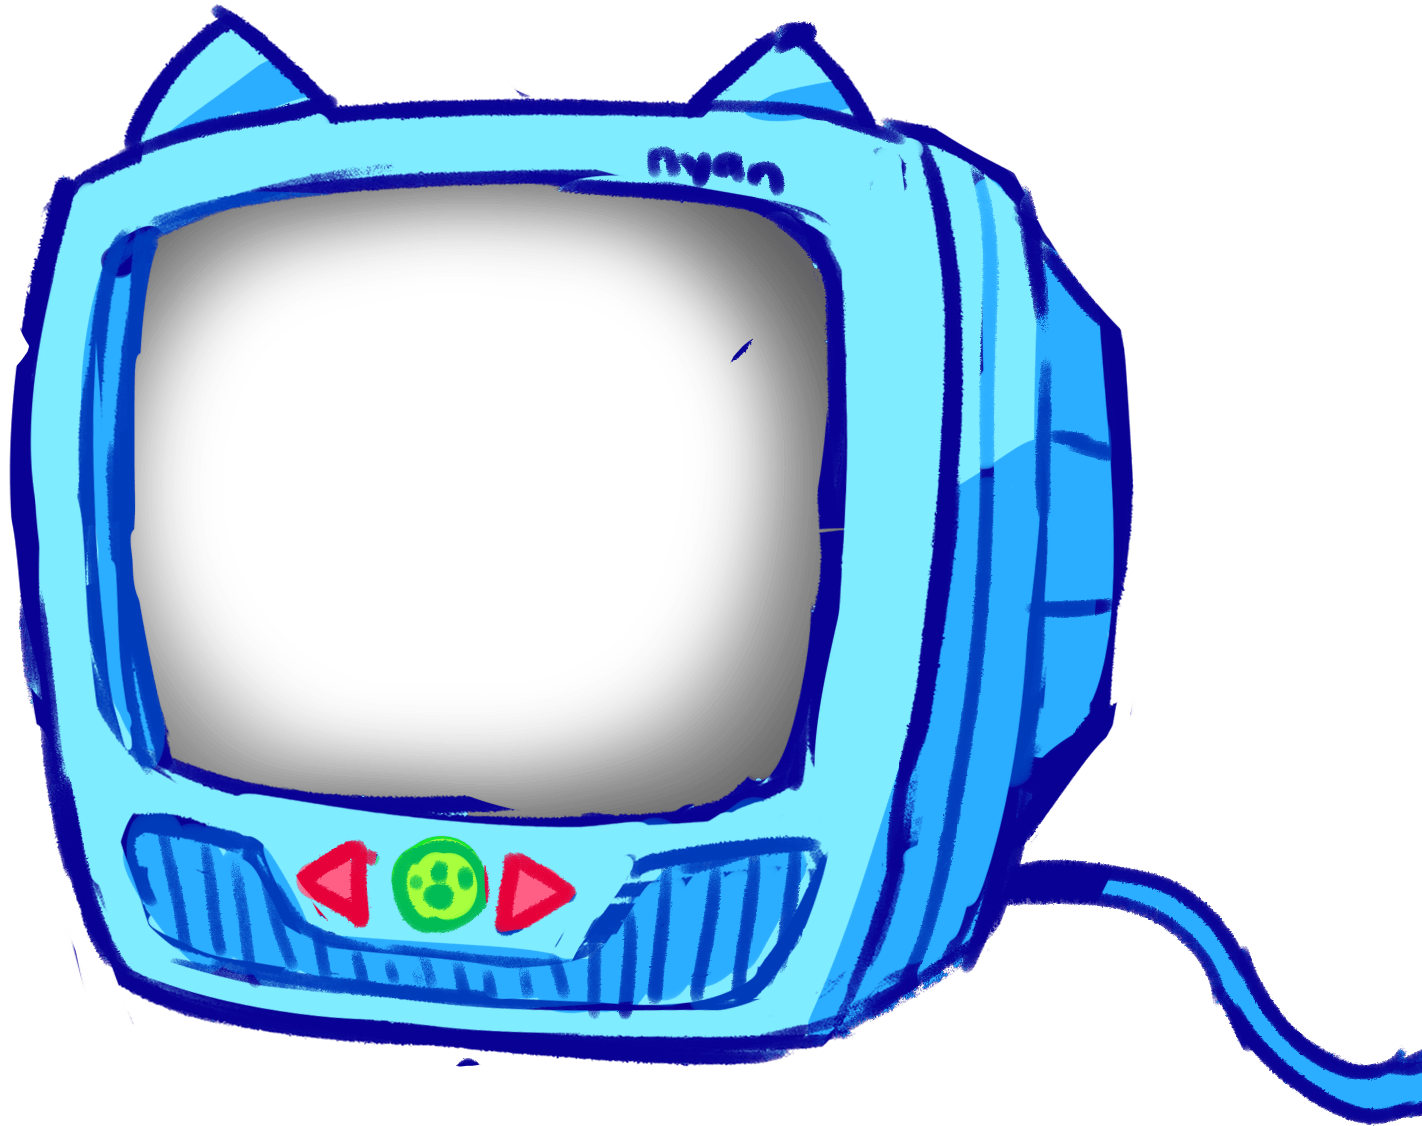 a colorful CRT television with cat ears